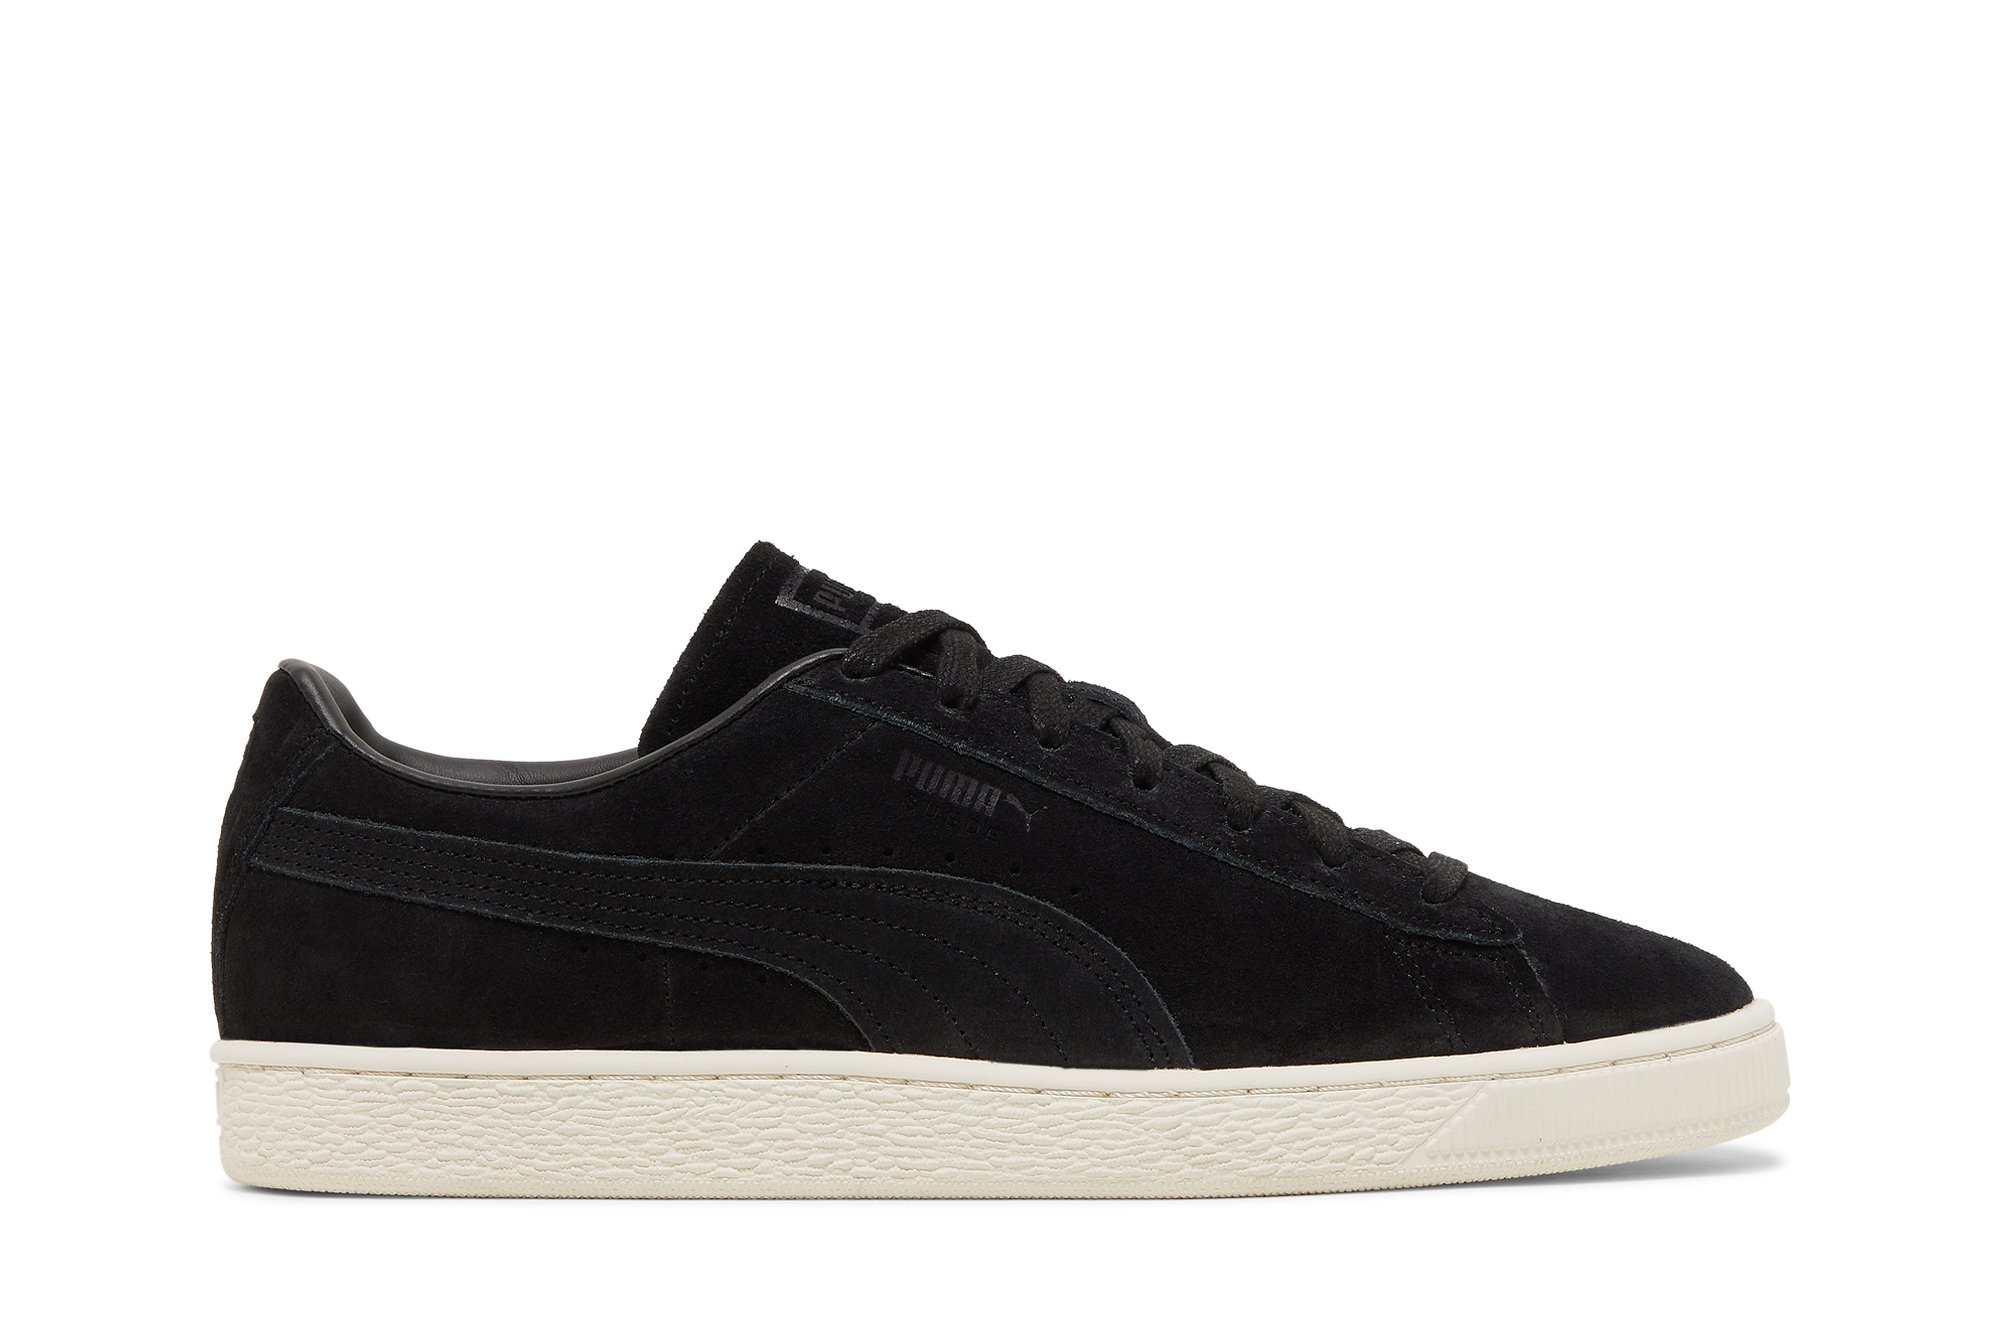 Buy Suede Classic '75th Anniversary - Black' - 393325 01 | GOAT